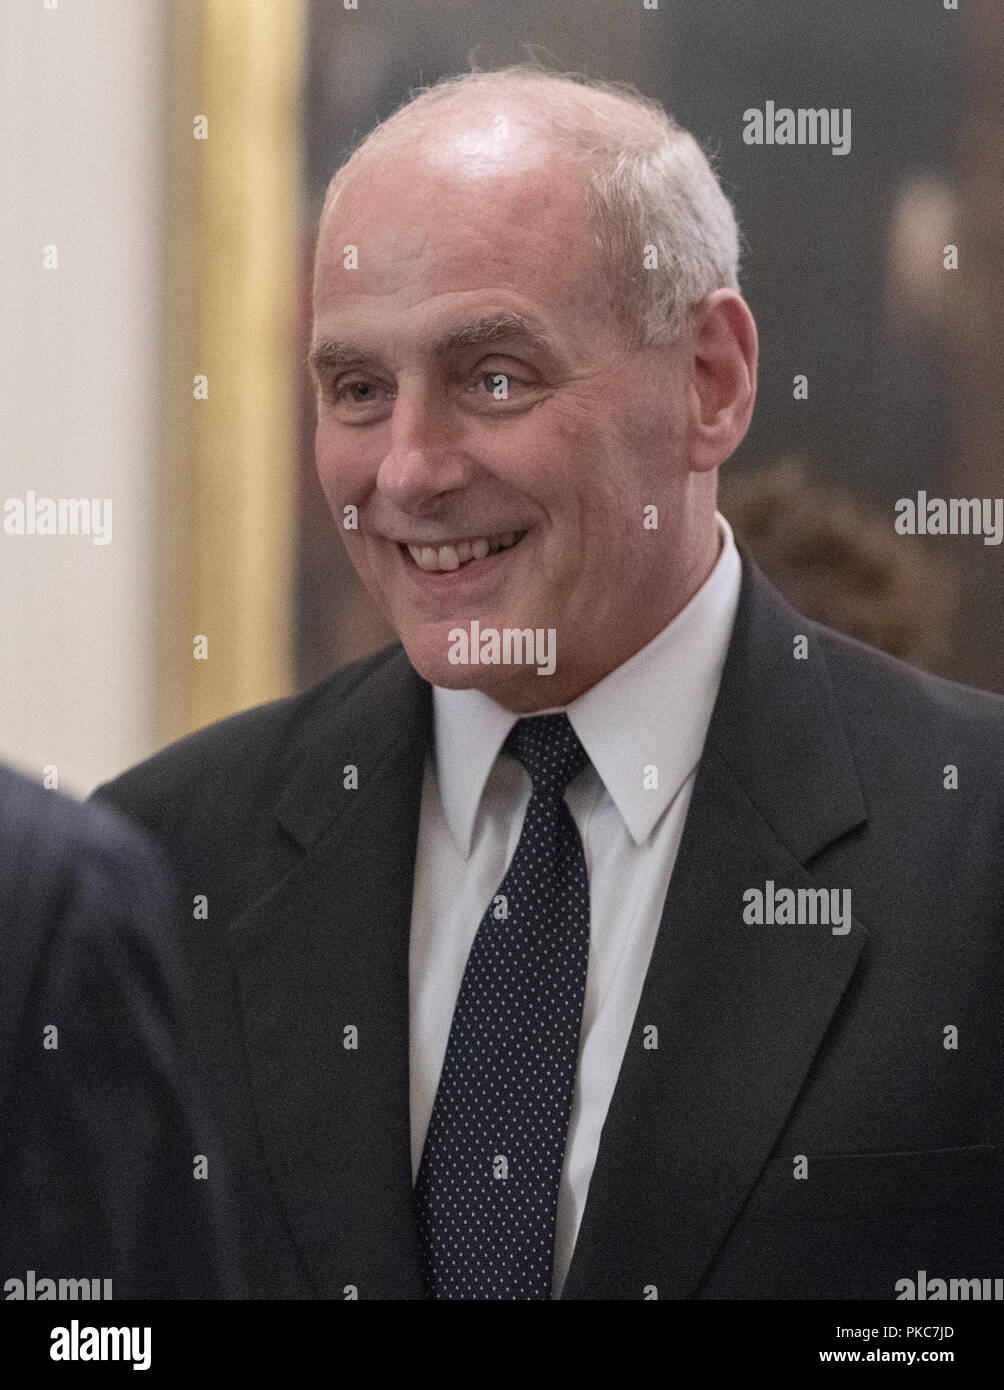 Washington, District of Columbia, USA. 12th Sep, 2018. White House Chief of Staff John Kelly prior to the arrival of US President Donald J. Trump who will make remarks at the Congressional Medal of Honor Society Reception in the East Room of the White House in Washington, DC on Wednesday, September 12, 2018 Credit: Ron Sachs/CNP/ZUMA Wire/Alamy Live News Stock Photo